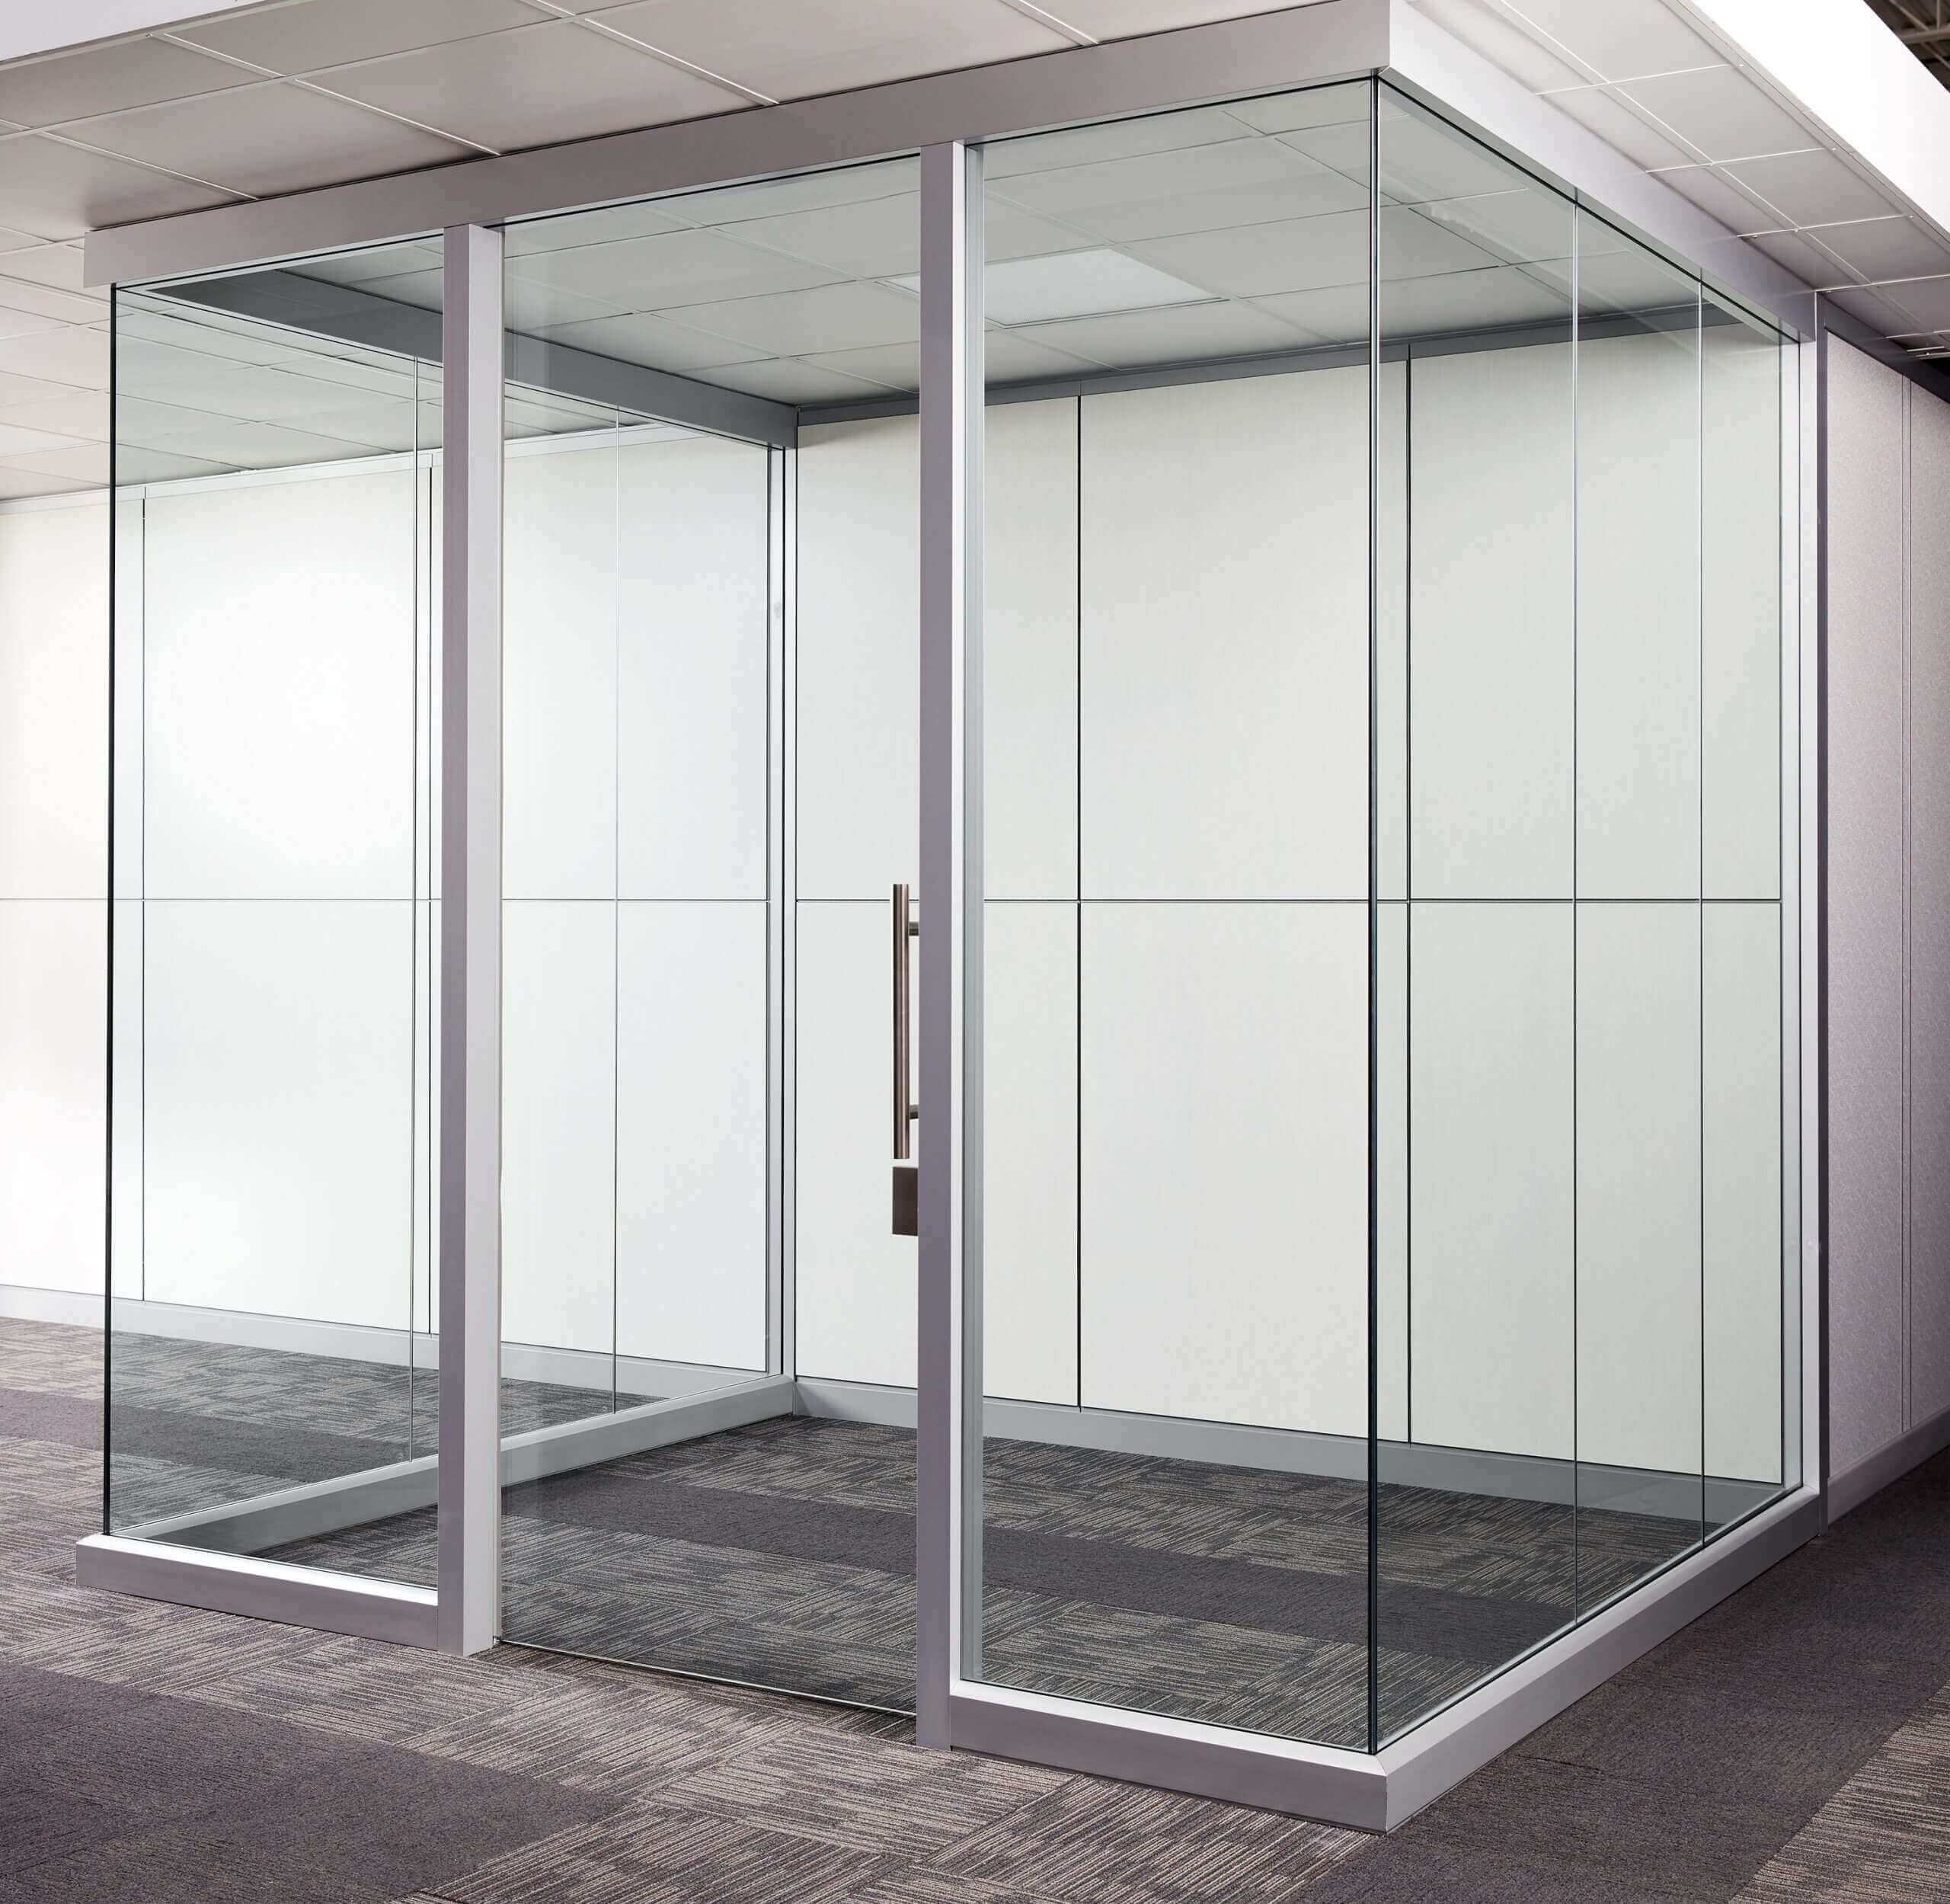 Architectural Glass Walls